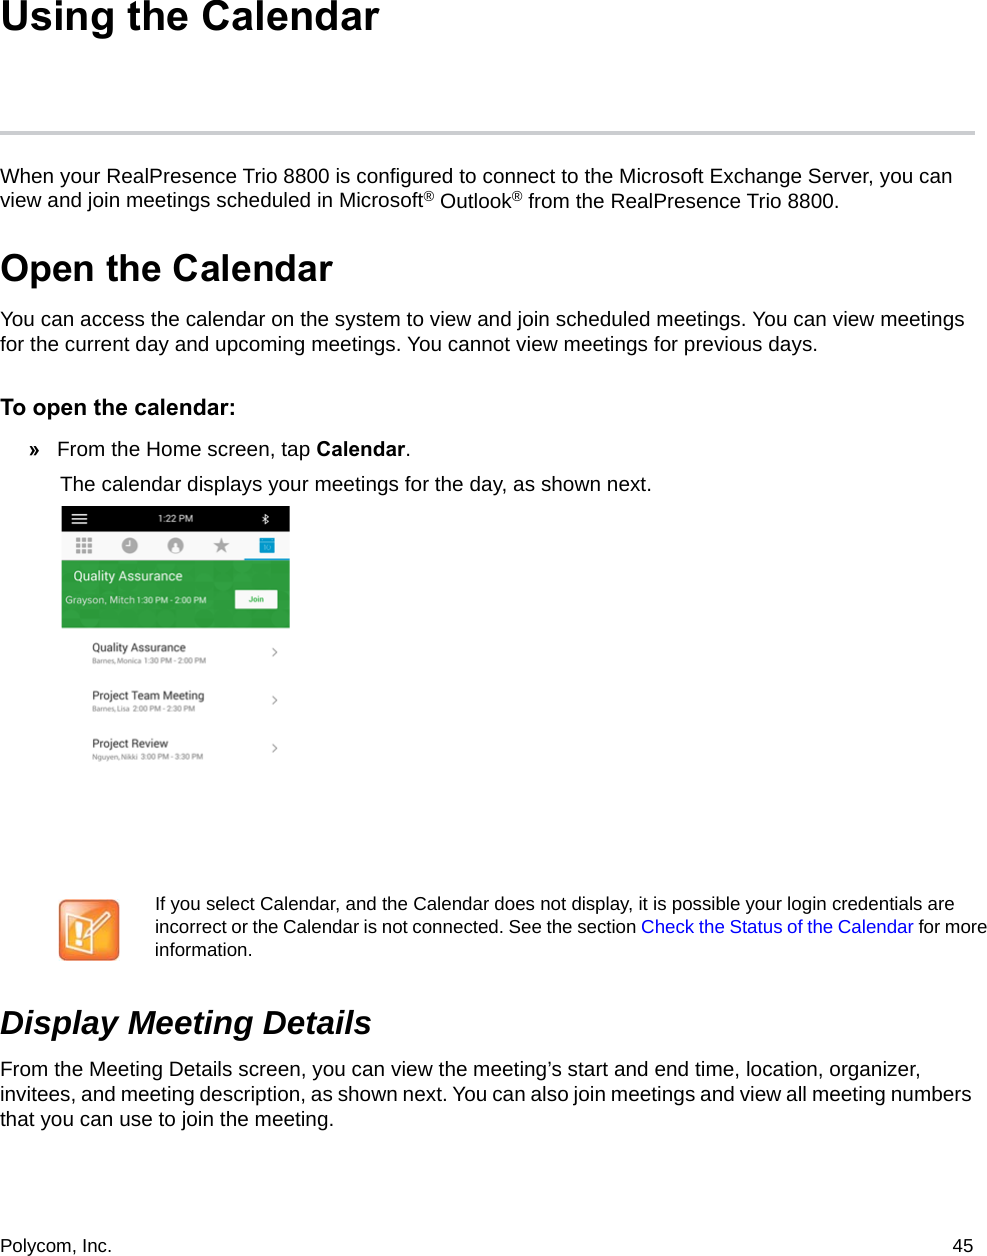 Polycom, Inc.  45 Using the CalendarWhen your RealPresence Trio 8800 is configured to connect to the Microsoft Exchange Server, you can view and join meetings scheduled in Microsoft® Outlook® from the RealPresence Trio 8800.Open the CalendarYou can access the calendar on the system to view and join scheduled meetings. You can view meetings for the current day and upcoming meetings. You cannot view meetings for previous days.To open the calendar: »From the Home screen, tap Calendar.The calendar displays your meetings for the day, as shown next. Display Meeting DetailsFrom the Meeting Details screen, you can view the meeting’s start and end time, location, organizer, invitees, and meeting description, as shown next. You can also join meetings and view all meeting numbers that you can use to join the meeting.If you select Calendar, and the Calendar does not display, it is possible your login credentials are incorrect or the Calendar is not connected. See the section Check the Status of the Calendar for more information.